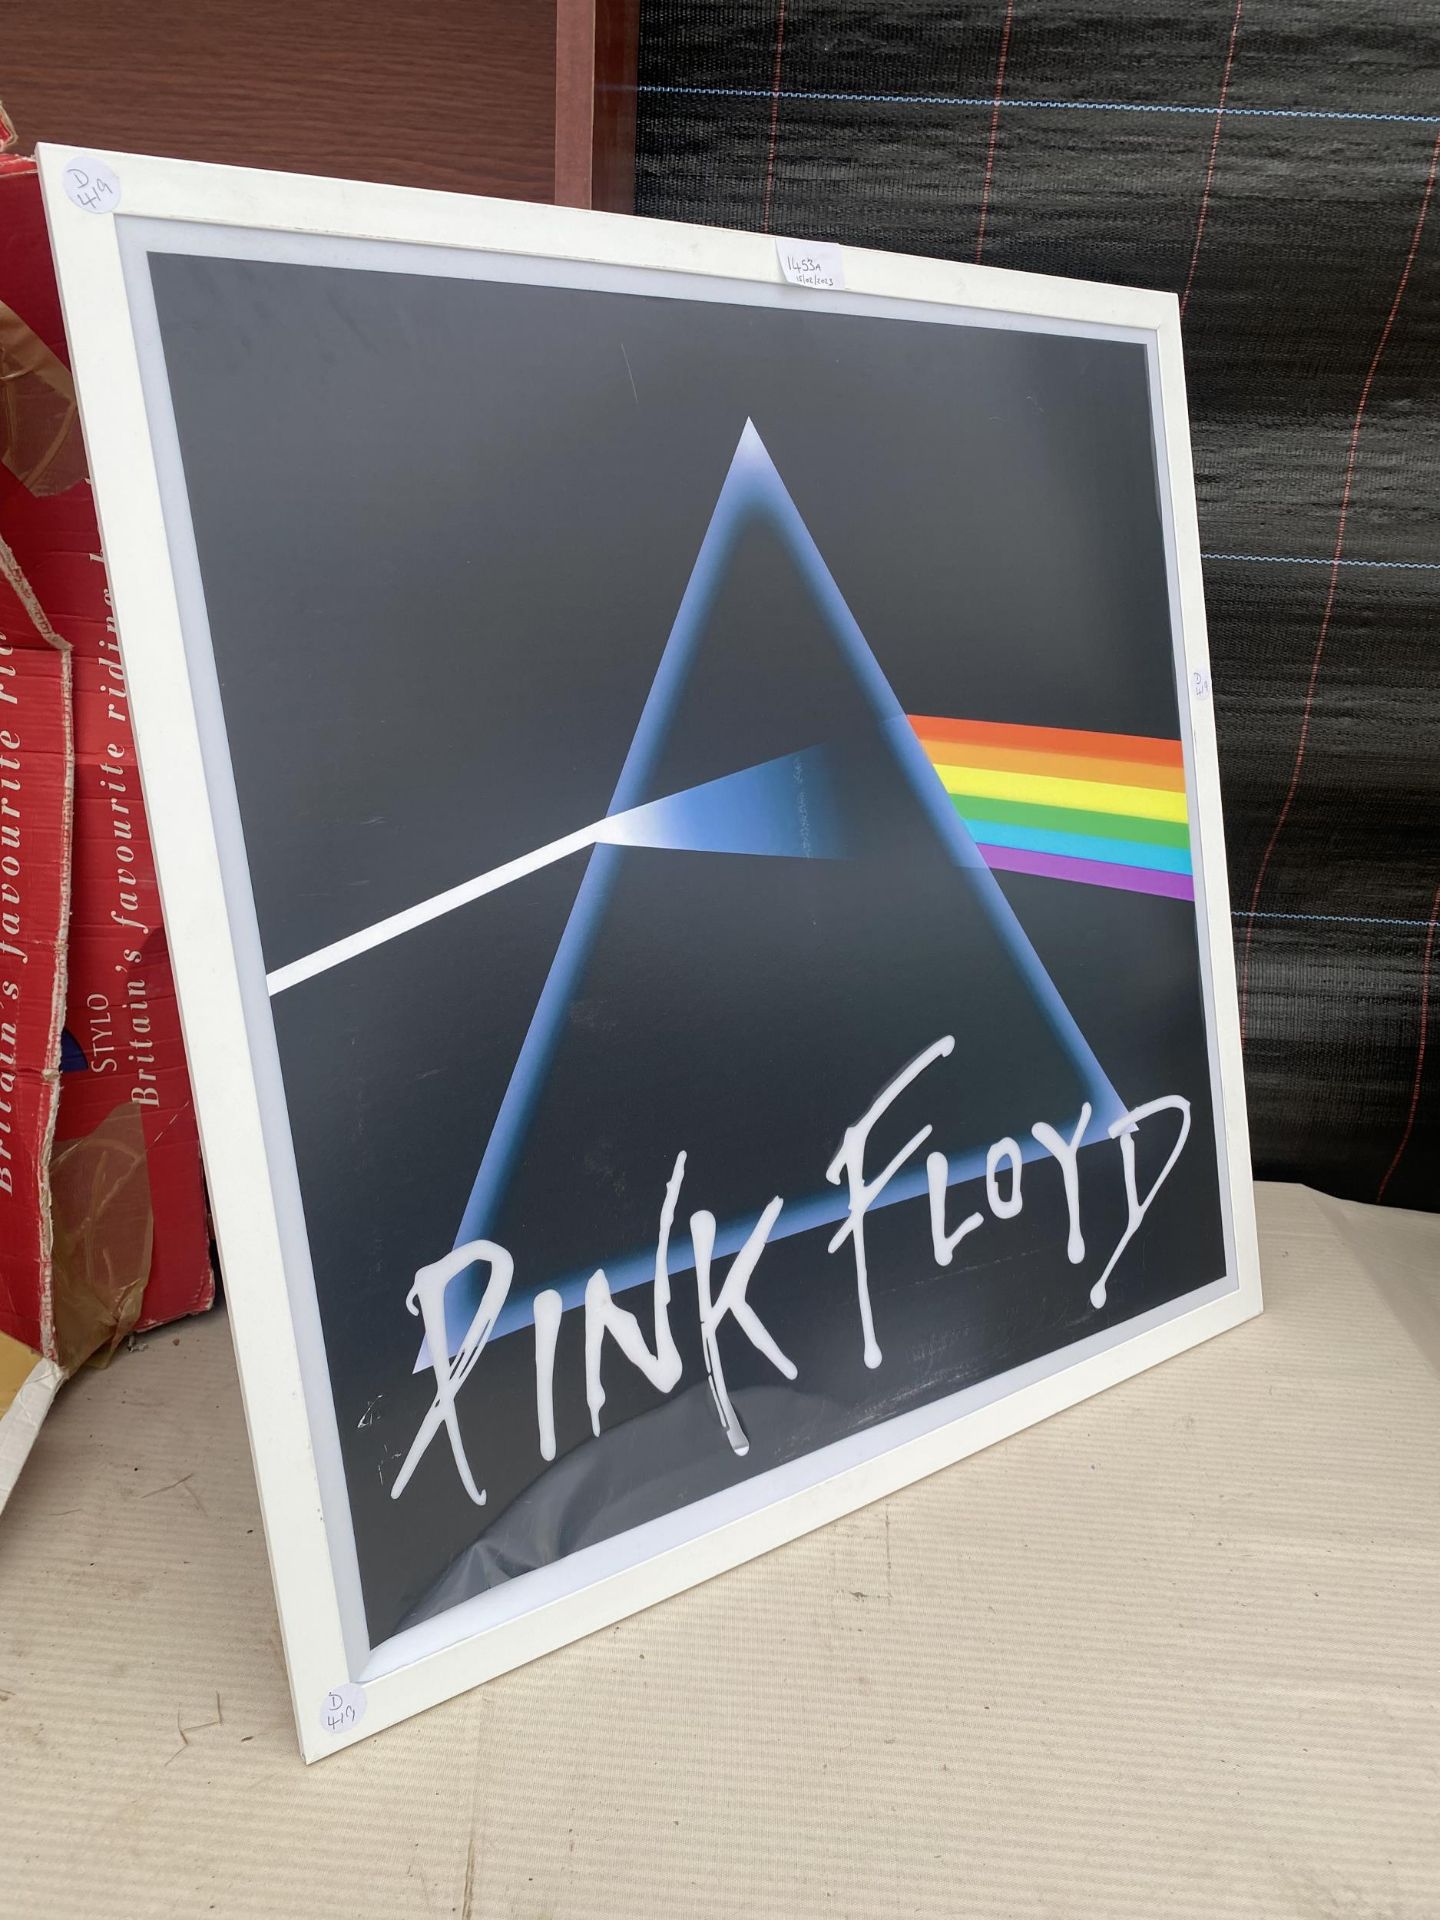 AN ILLUMINATED PINK FLOYD SIGN LACKING ADAPTER AND PLUG - Image 2 of 4